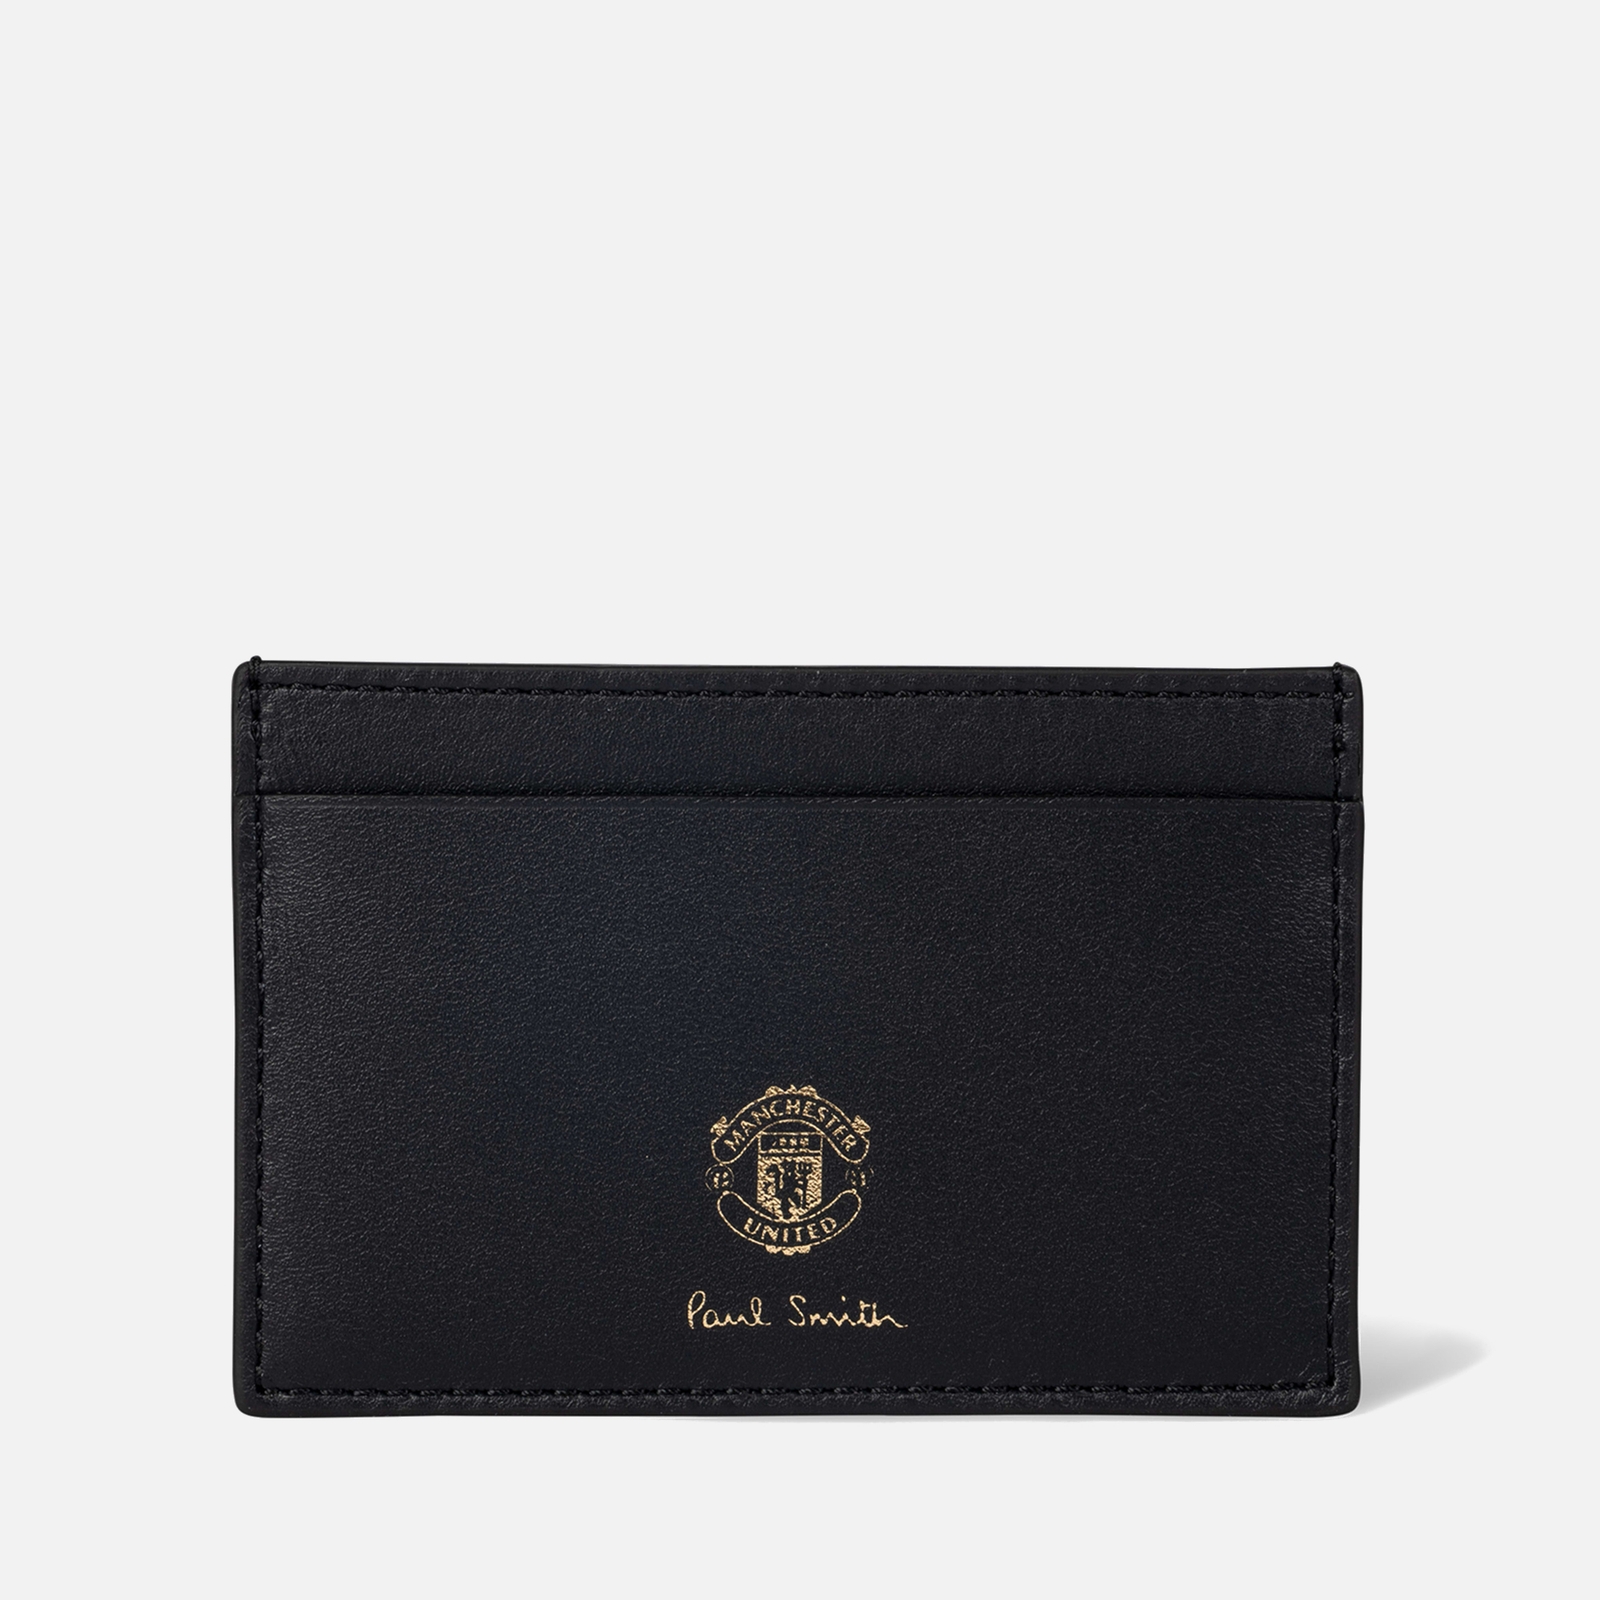 Photos - Card Holder Paul Smith Manchester United Leather Cardholder M1A-4768-AMUREF-79 